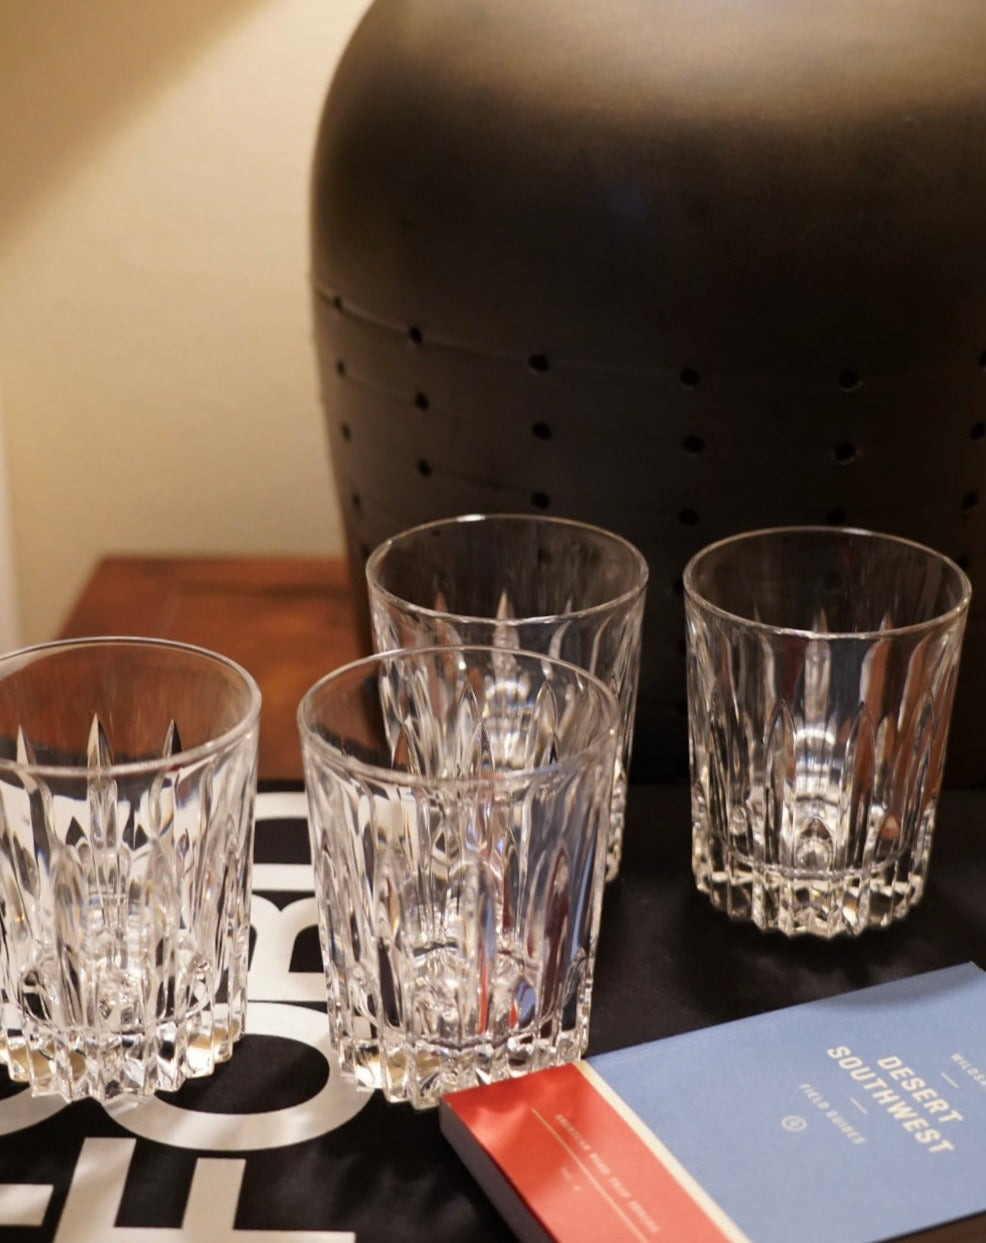 VINTAGE OLD-FASHIONED CRYSTAL LOWBALL GLASSES